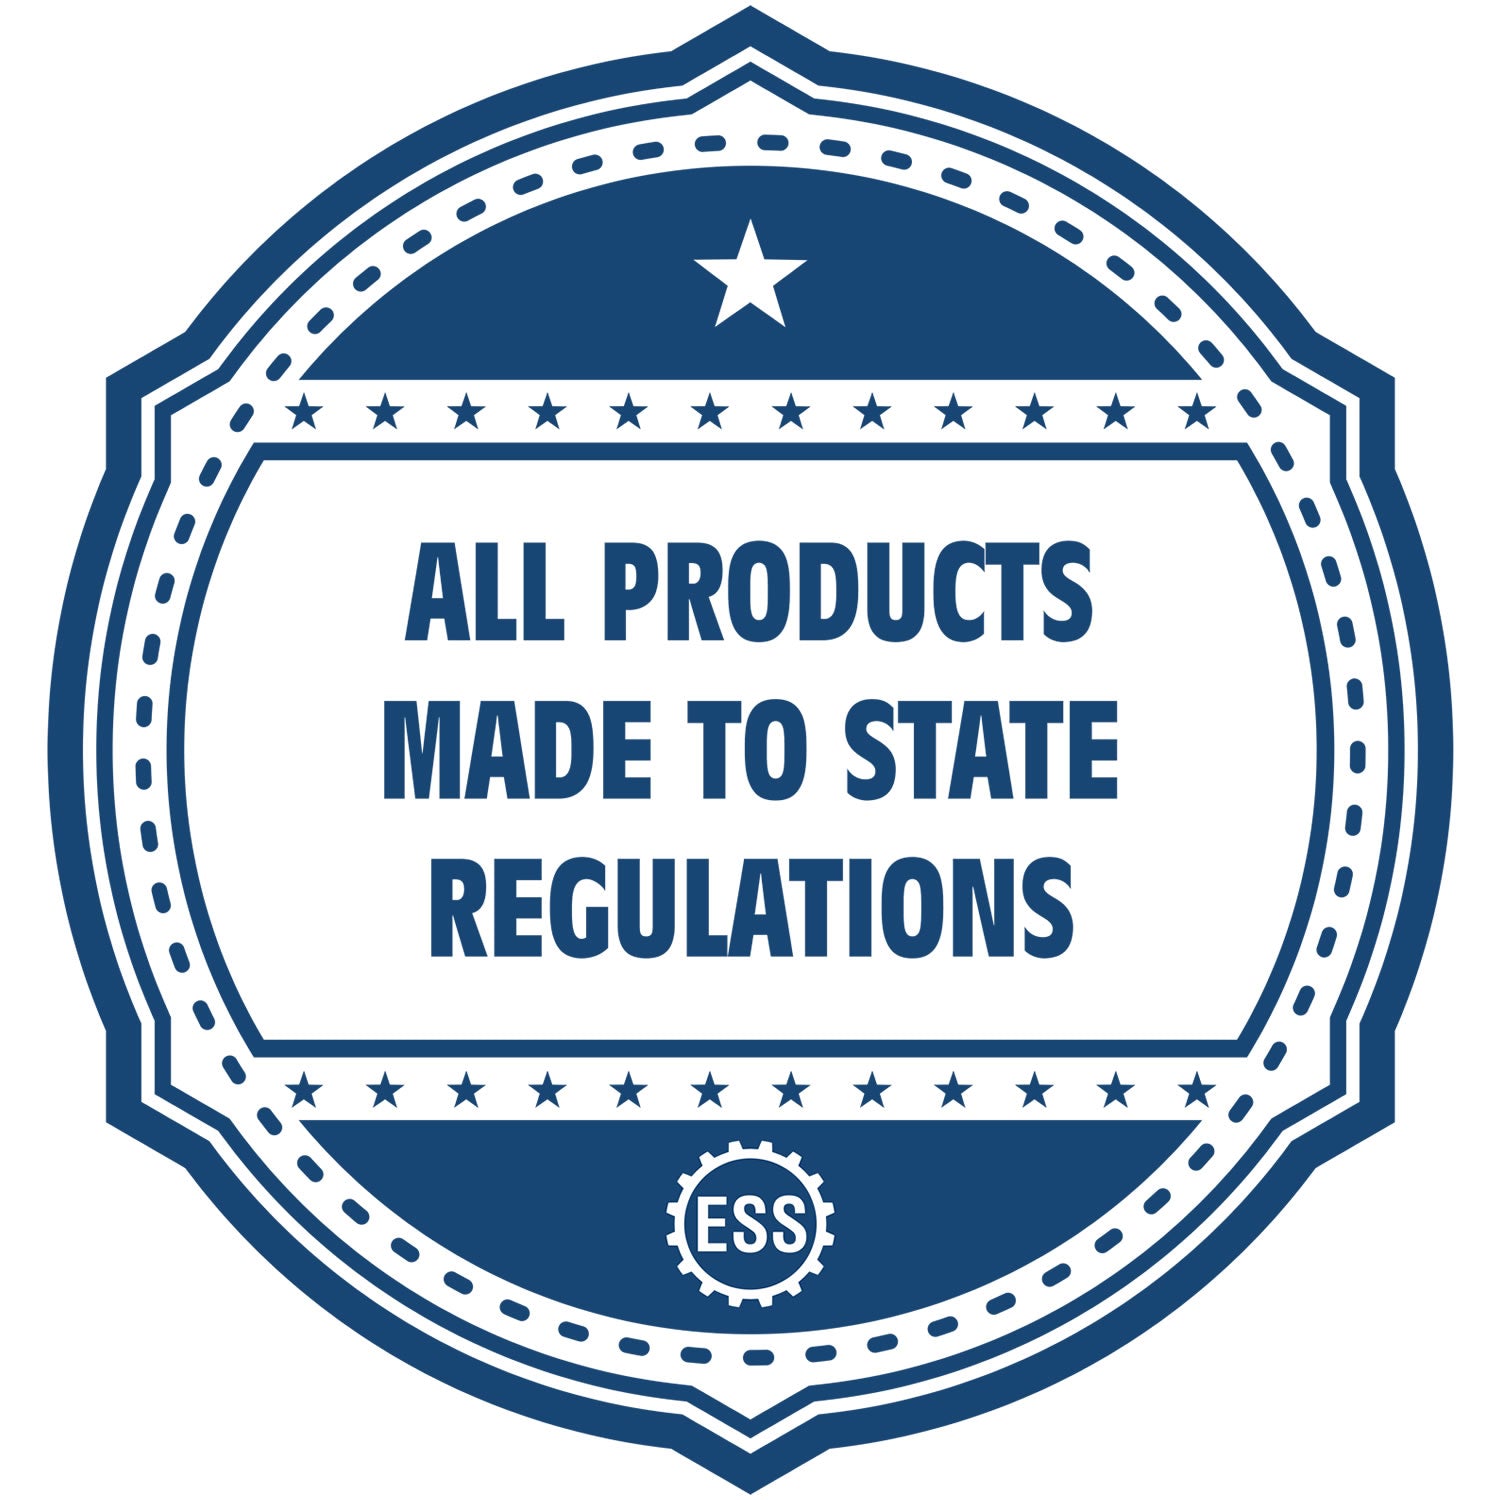 An icon or badge element for the Slim Pre-Inked Arkansas Architect Seal Stamp showing that this product is made in compliance with state regulations.